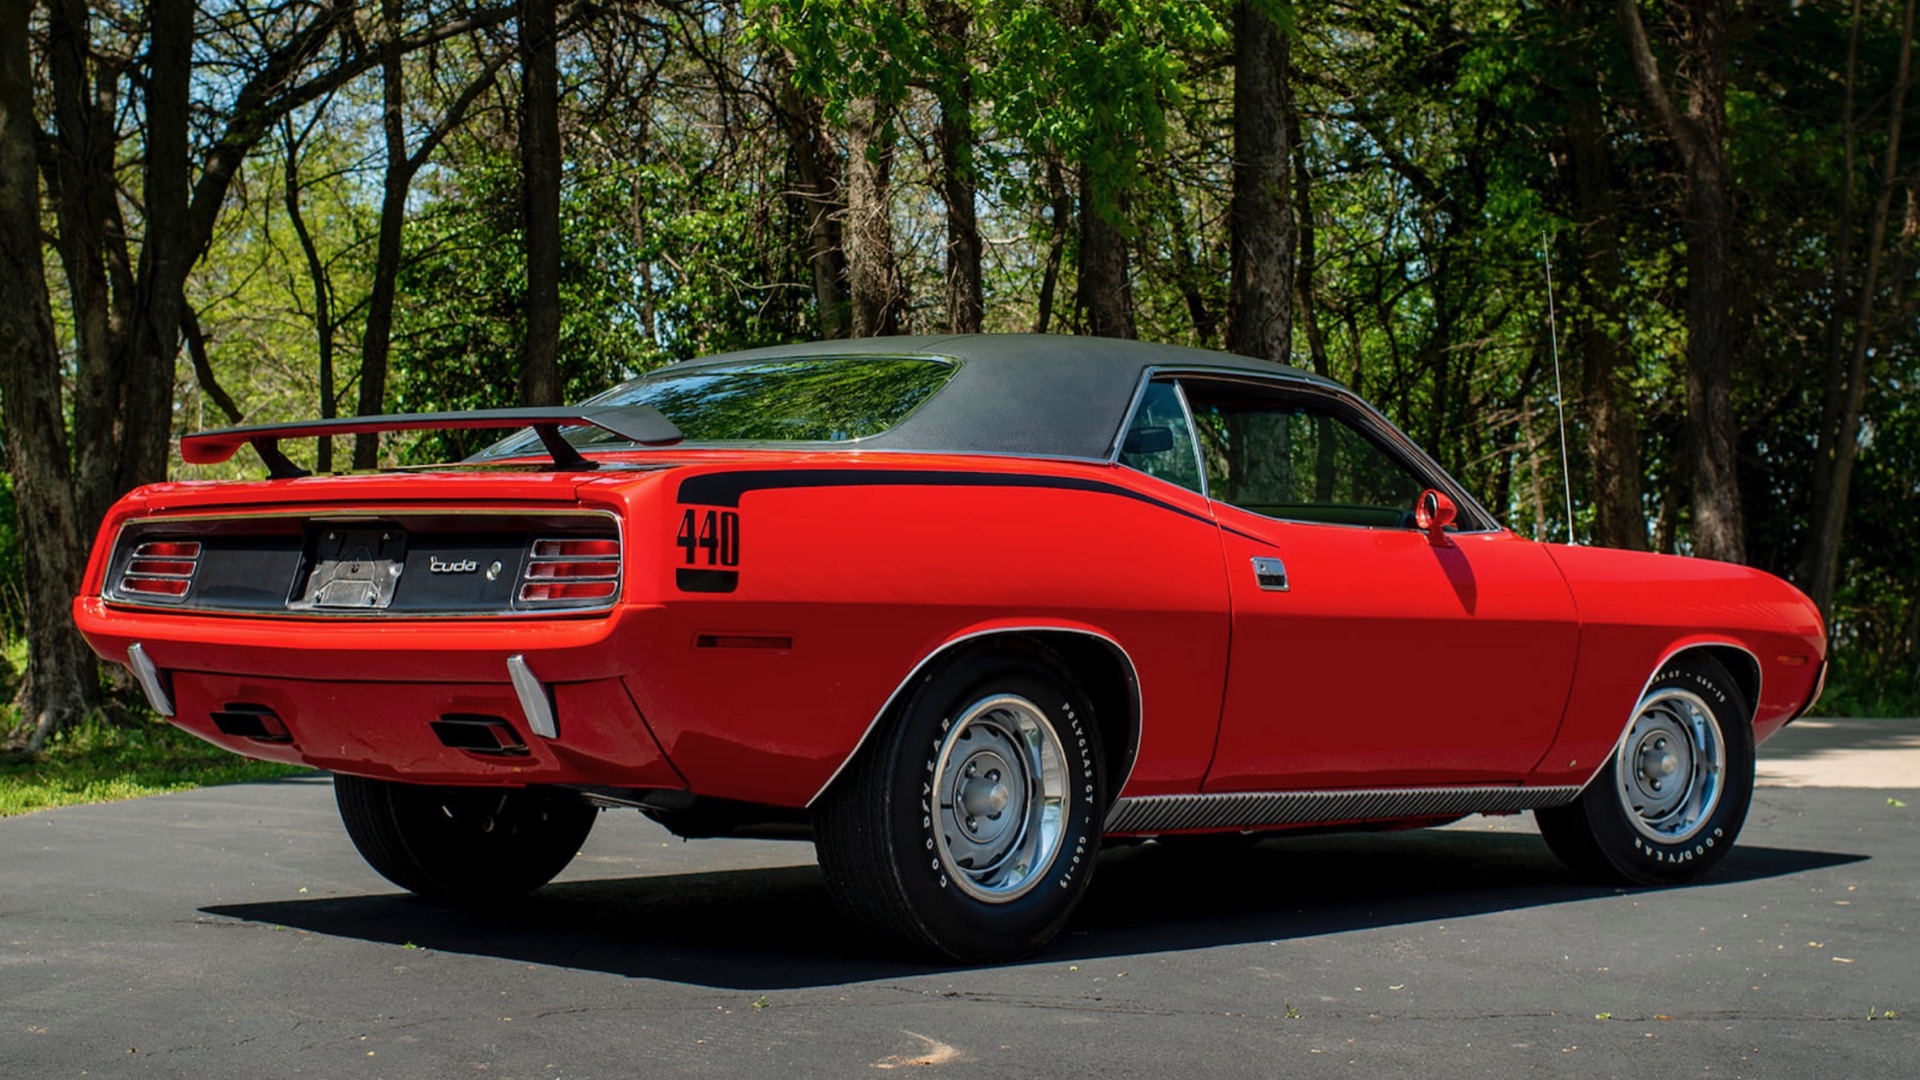 The 1970 Plymouth Cuda is up for auction